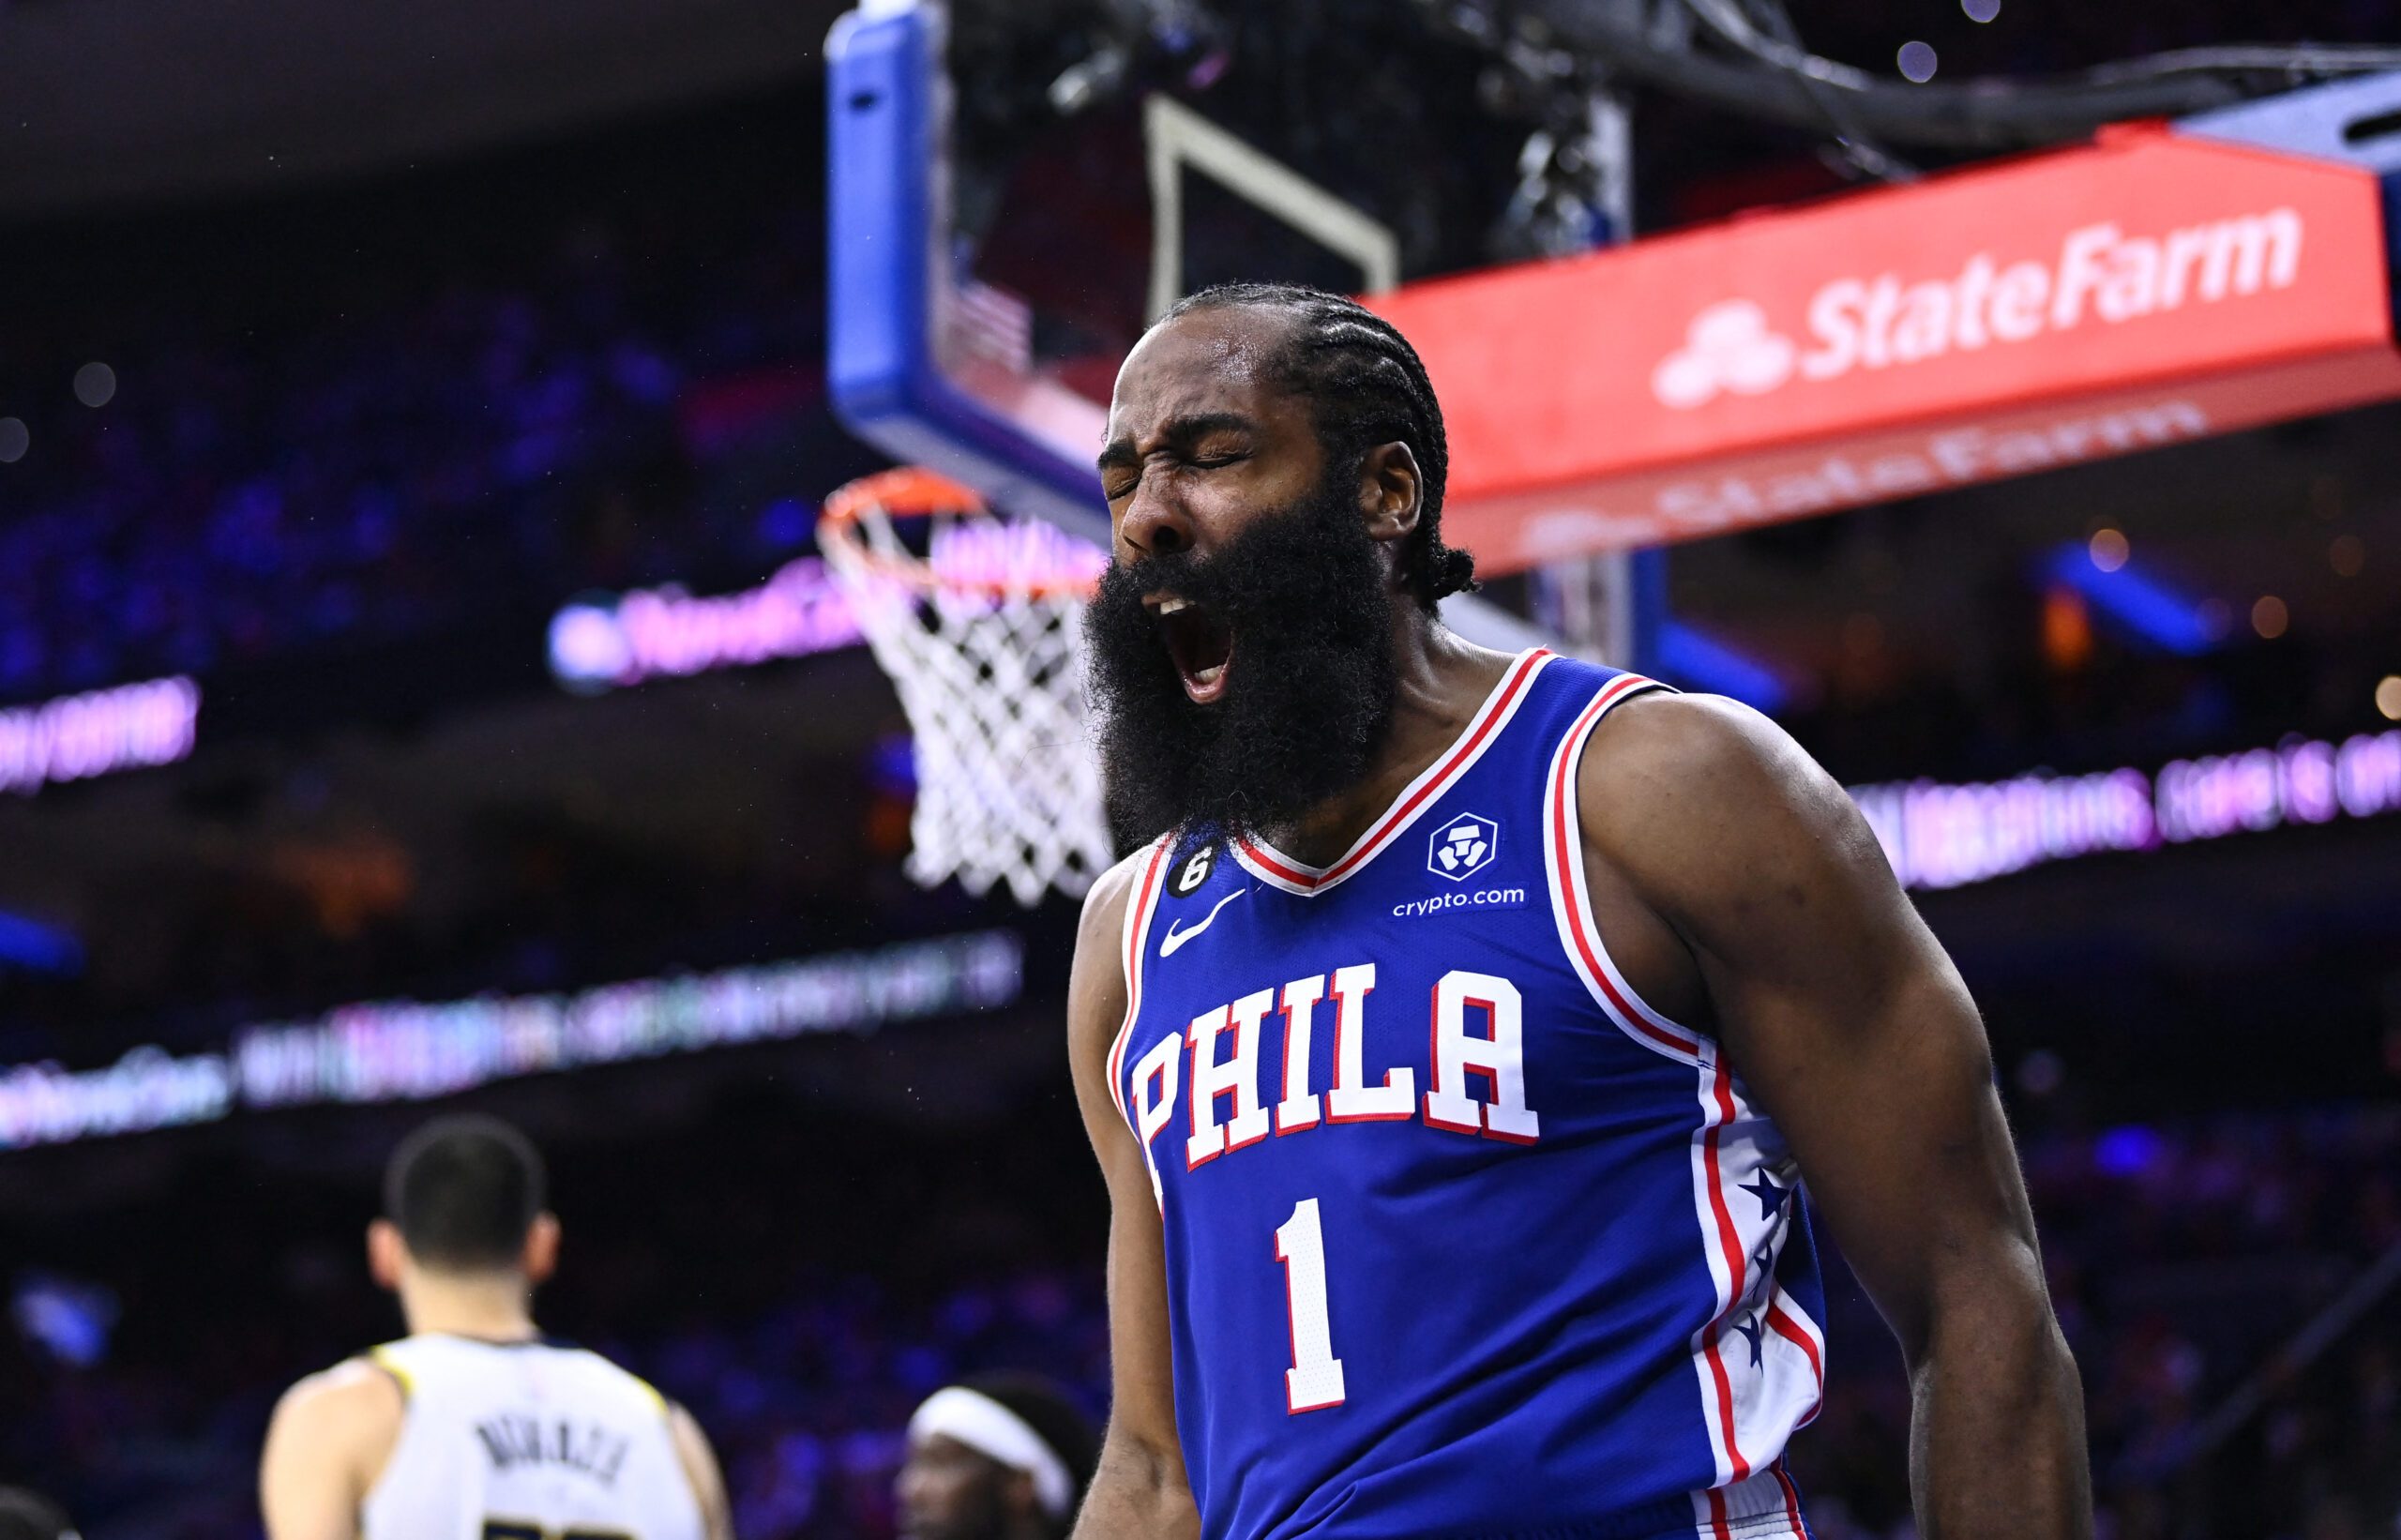 James Harden guides 76ers past Pacers for 1st win of season after 0-3 start